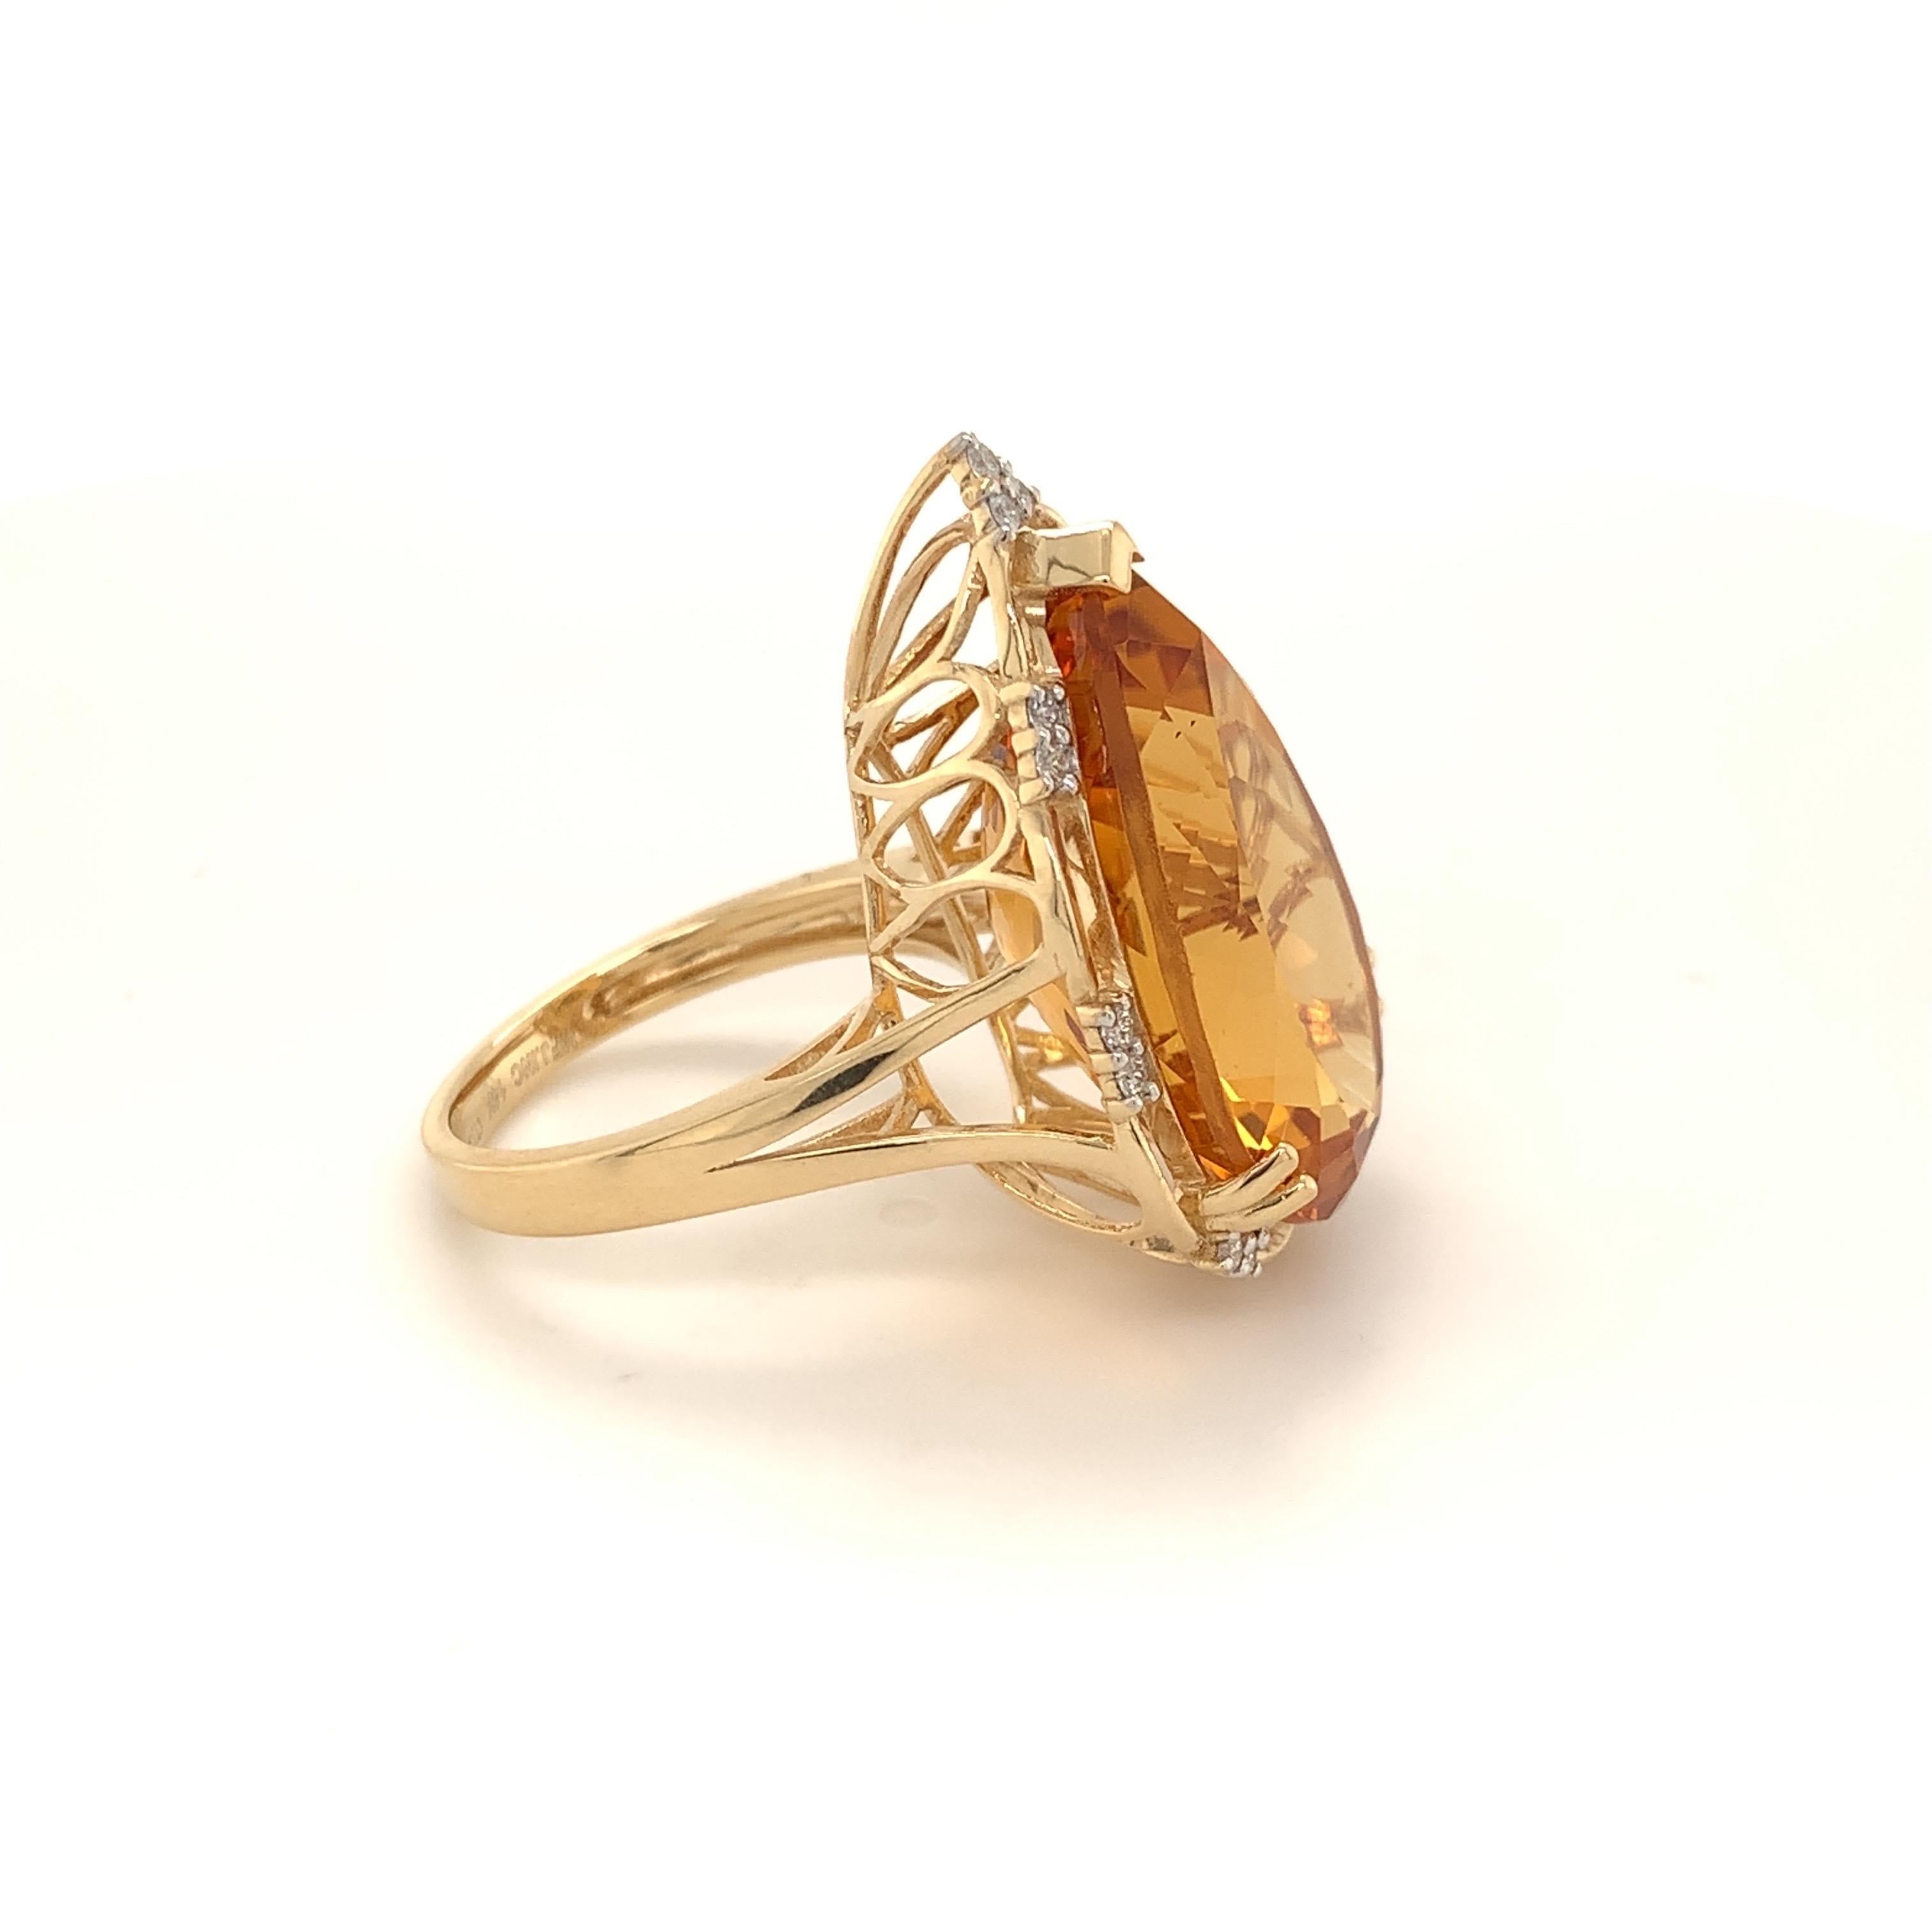 Glamorous ring. High brilliance, rich golden honey tone, transparent clean 17.03 carats natural citrine mounted in high profile open basket with four bead prongs and one knife edge prong, accented with round brilliant cut diamonds. Handcrafted